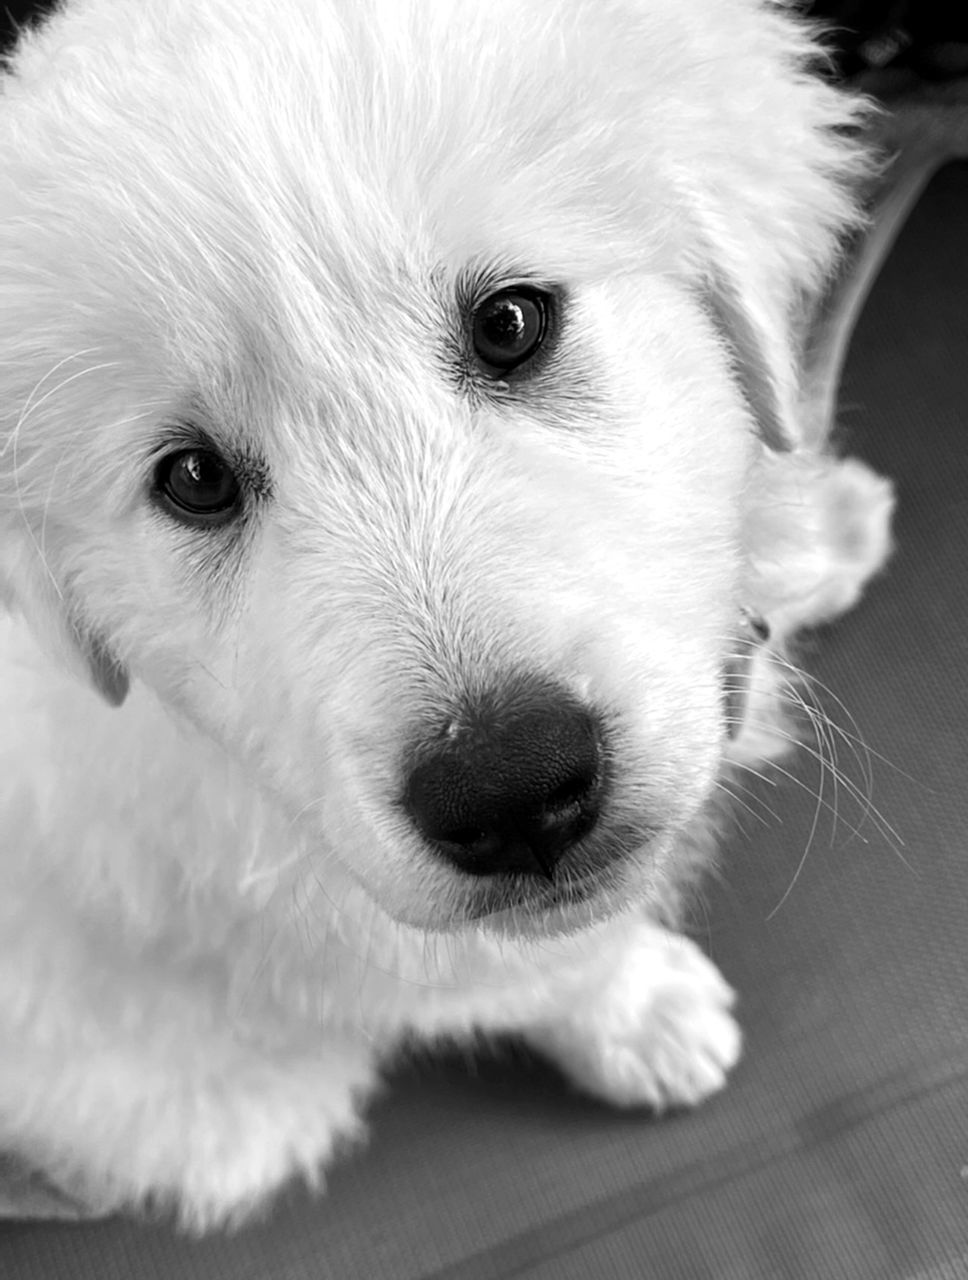 one animal, domestic animals, pet, animal themes, mammal, animal, dog, canine, white, puppy, black and white, portrait, looking at camera, animal body part, cute, young animal, close-up, animal head, no people, monochrome, monochrome photography, nose, indoors, carnivore, west highland white terrier, animal hair, lap dog